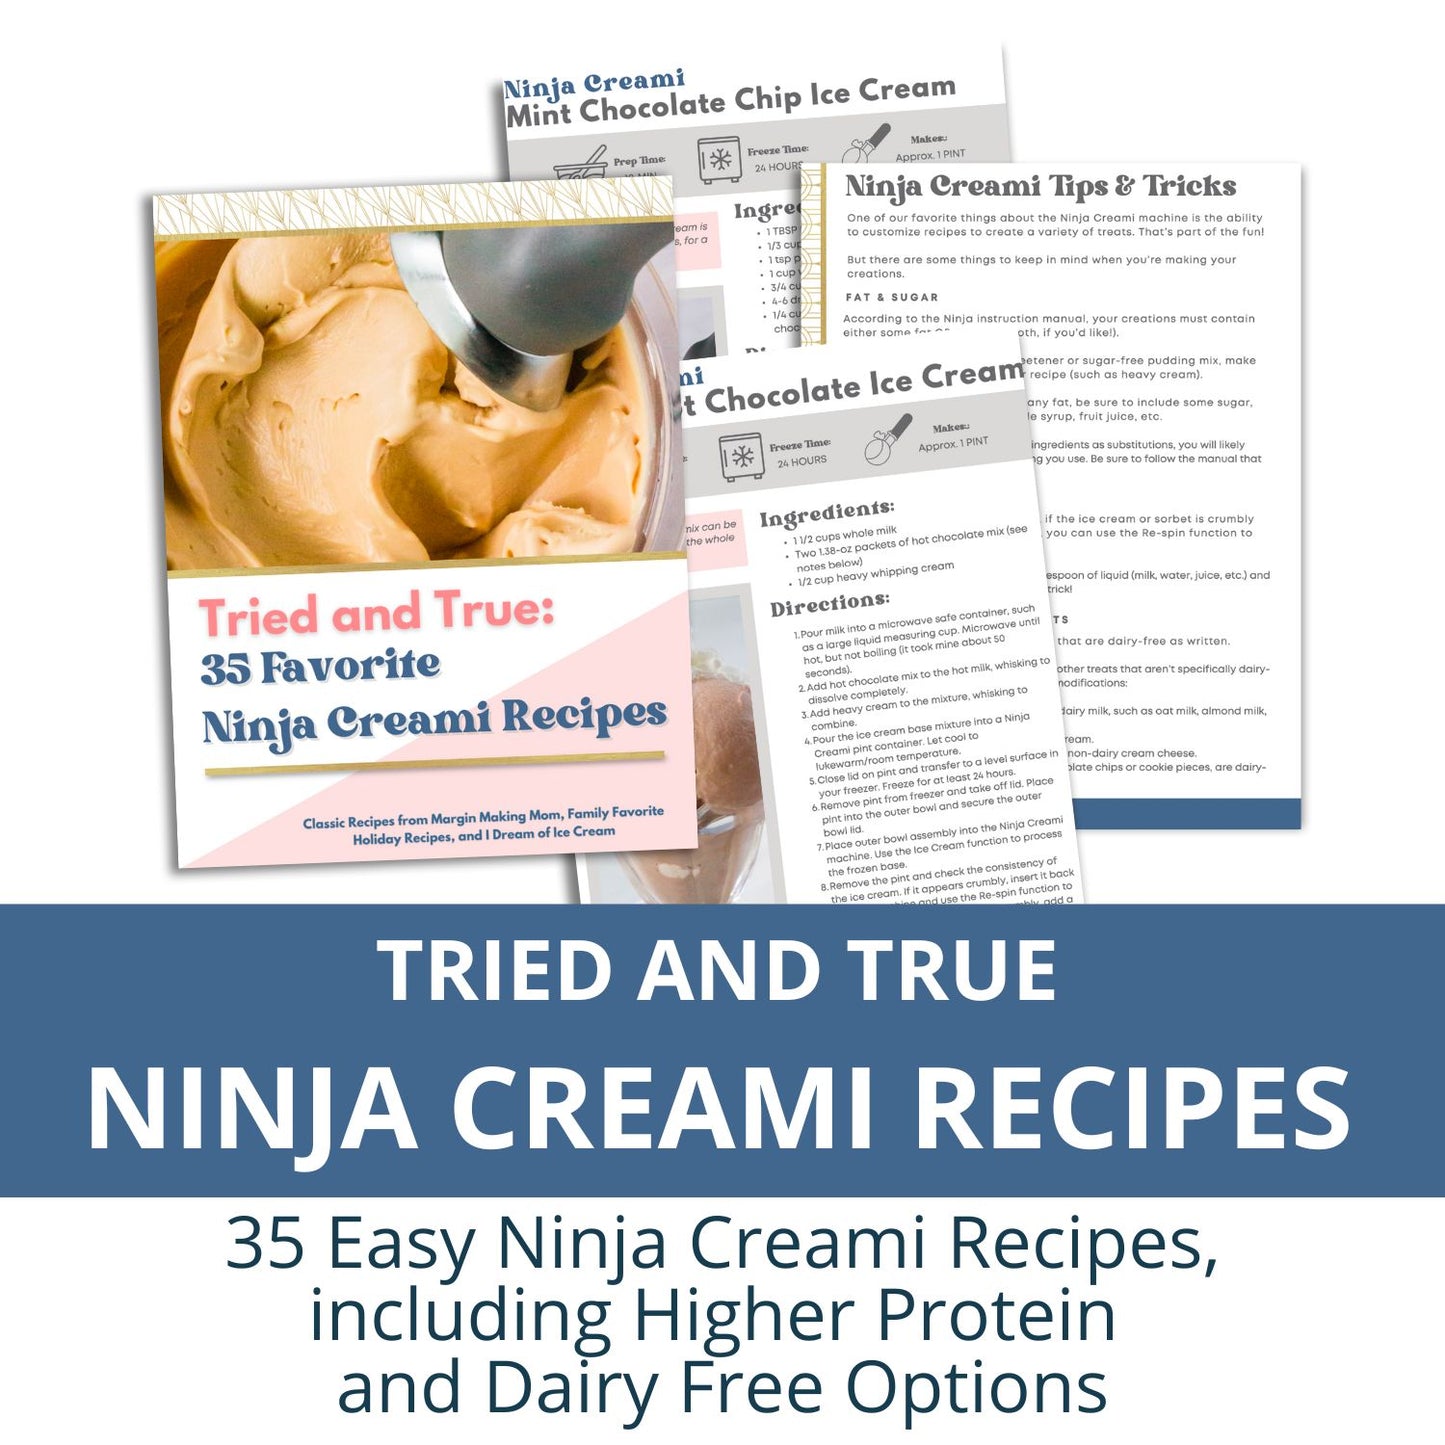 Must Your Ninja Creami Pints Freeze for 24 Hours? - I Dream of Ice Cream